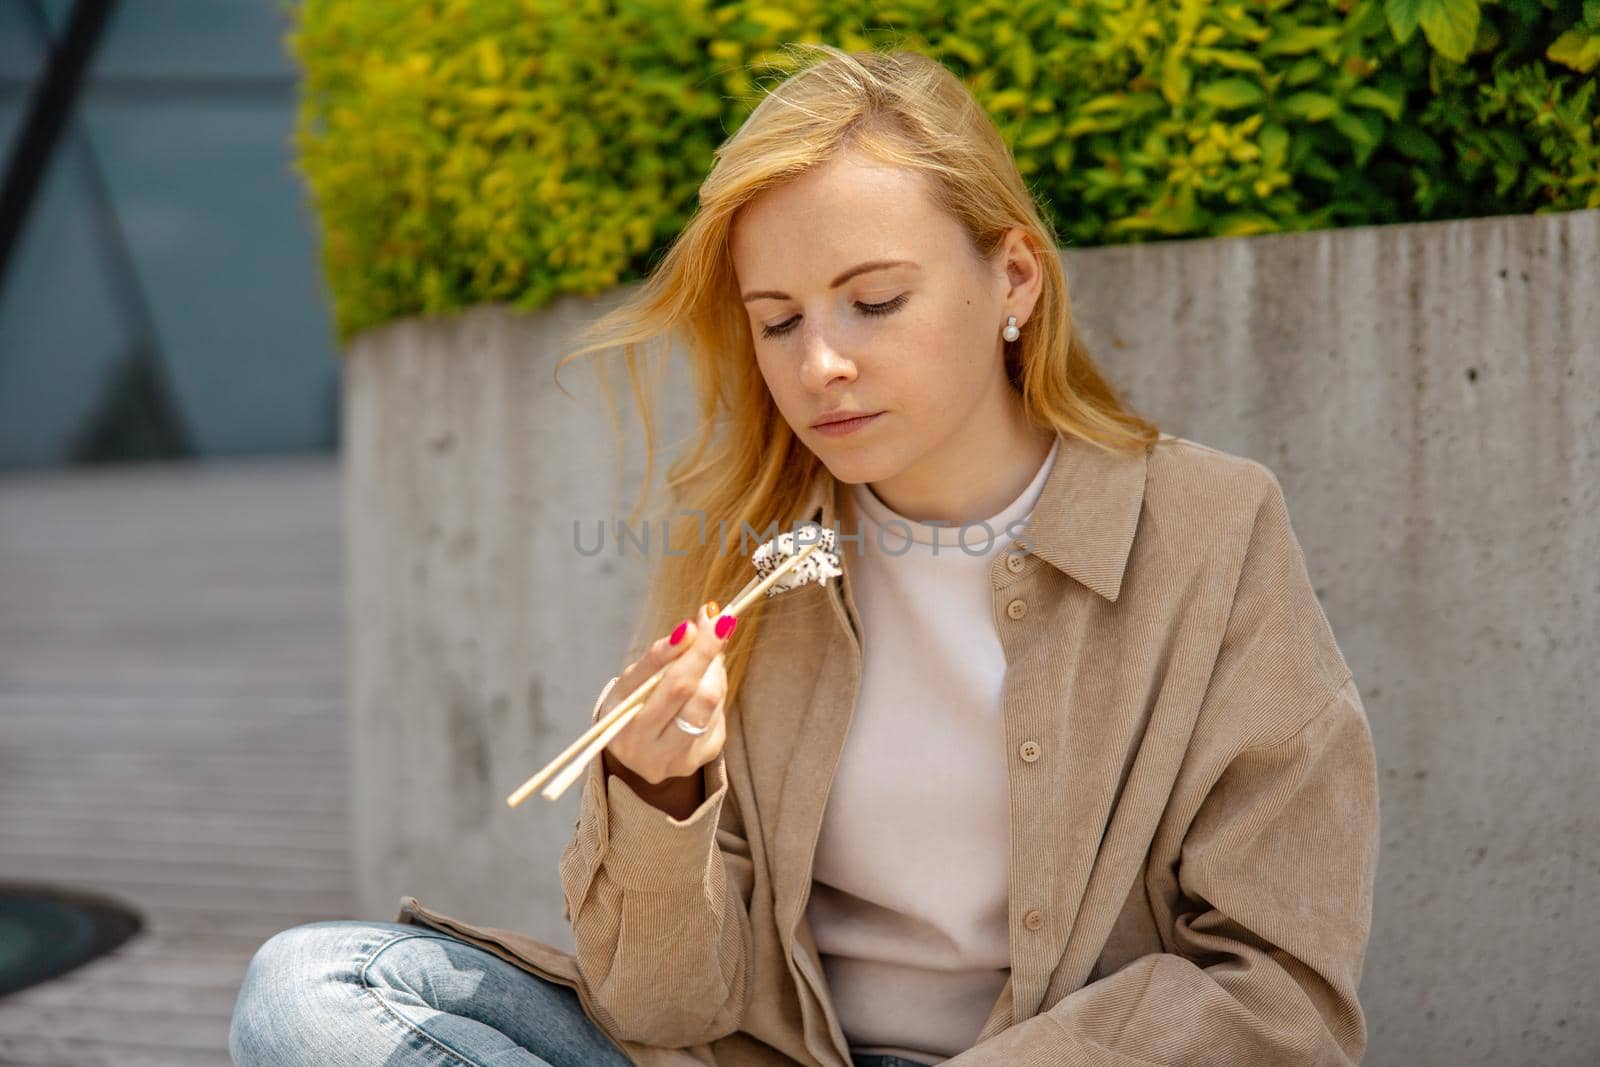 Young beautiful blond woman eating sushi outdoors, on the wooden terrace, by modern building in the city. Tasty food to go. Girl has lunch break, spending time outside and eating Asian food. City life by creativebird